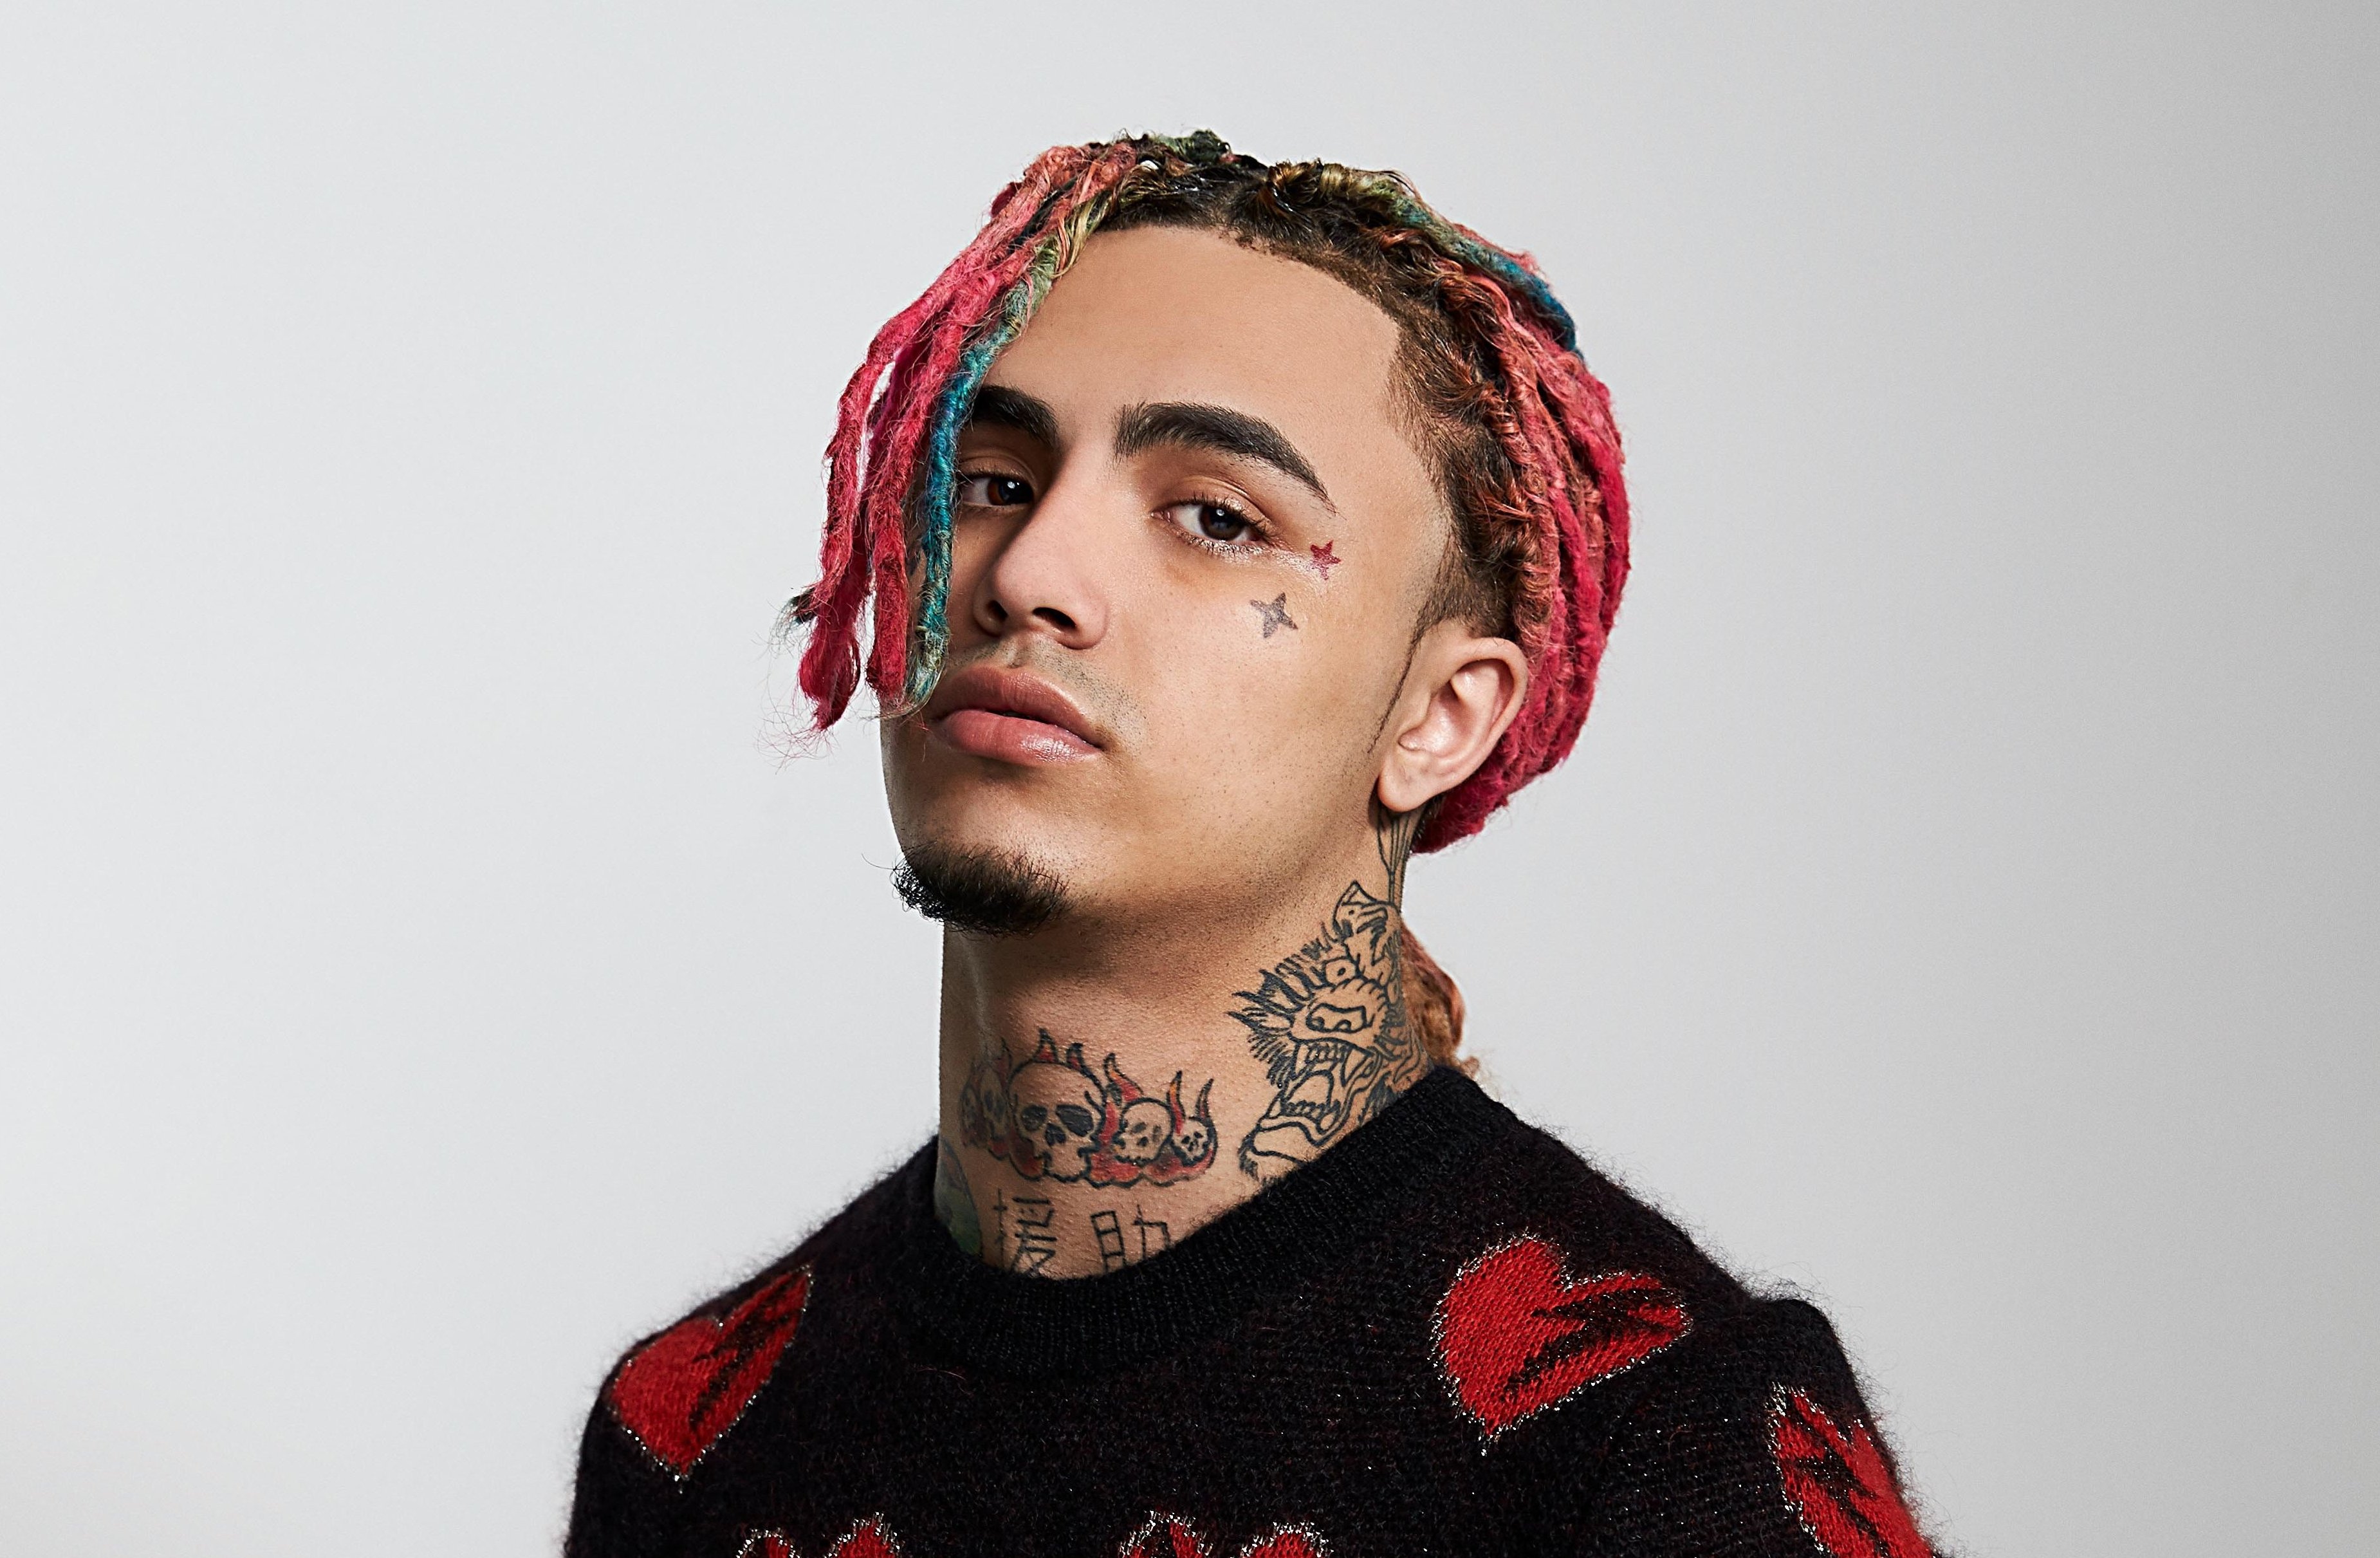 Lil pump hd music k wallpapers images backgrounds photos and pictures